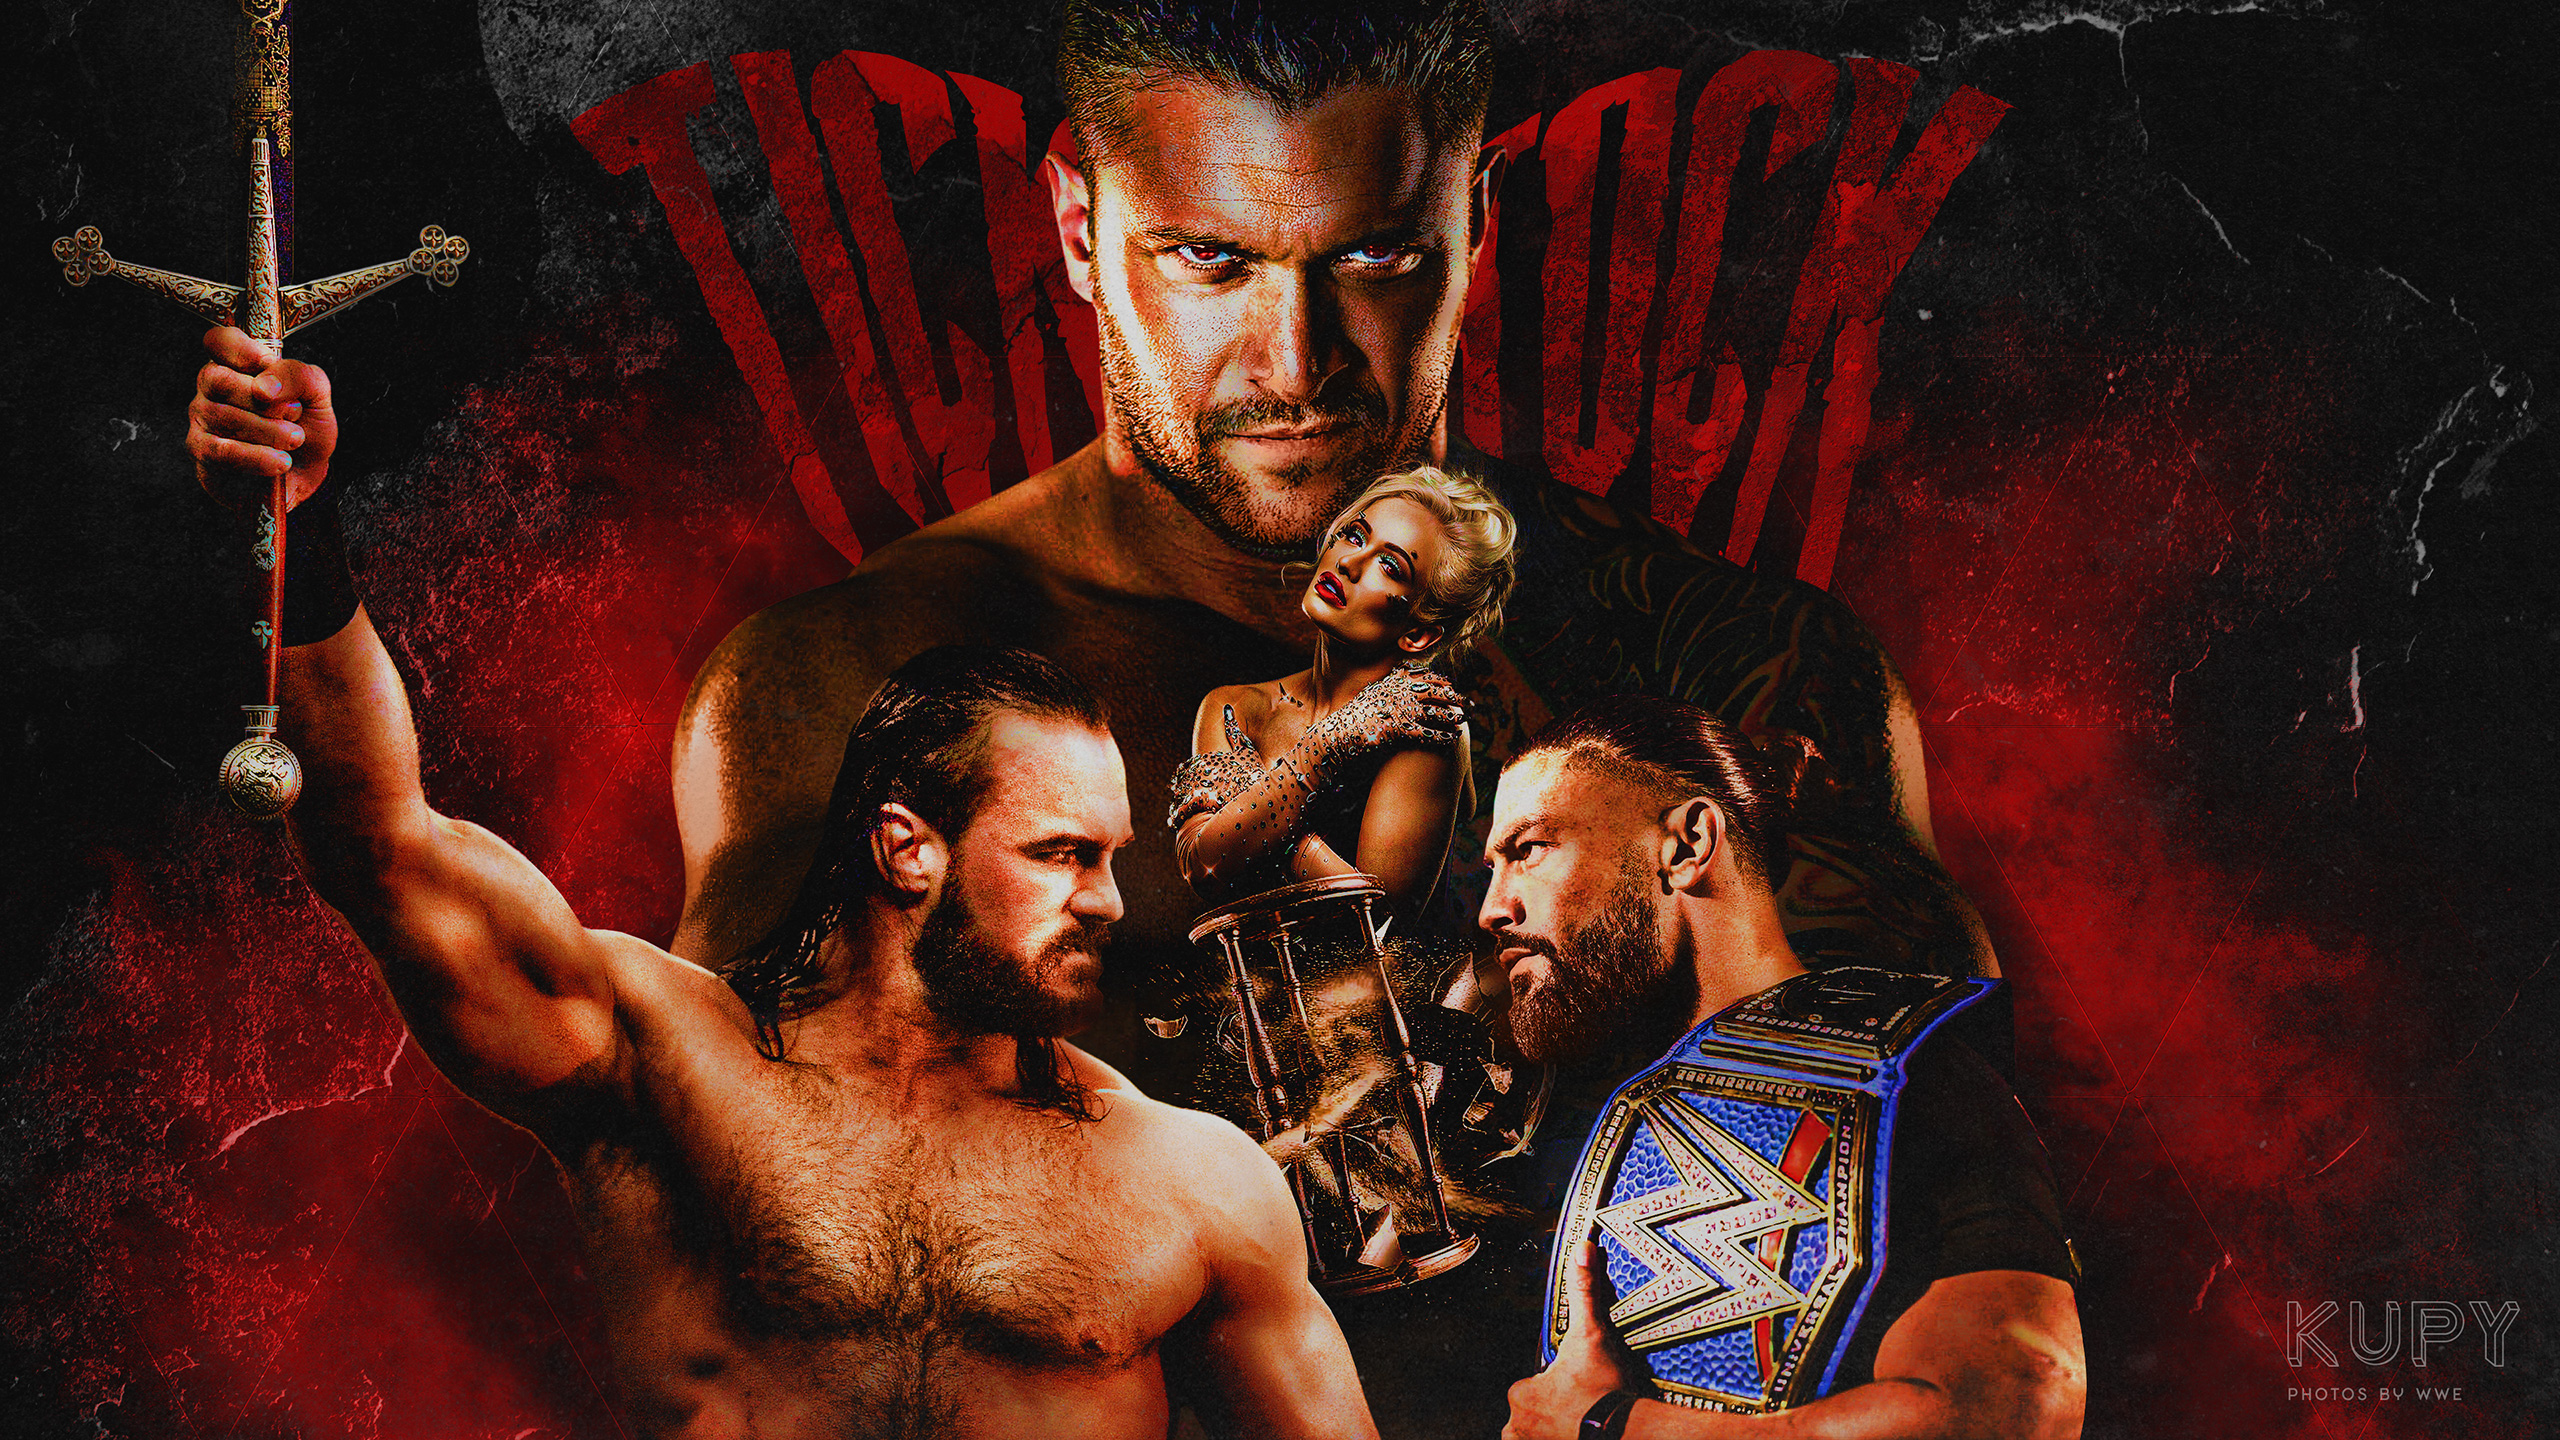 Cool Wwe Wallpapers